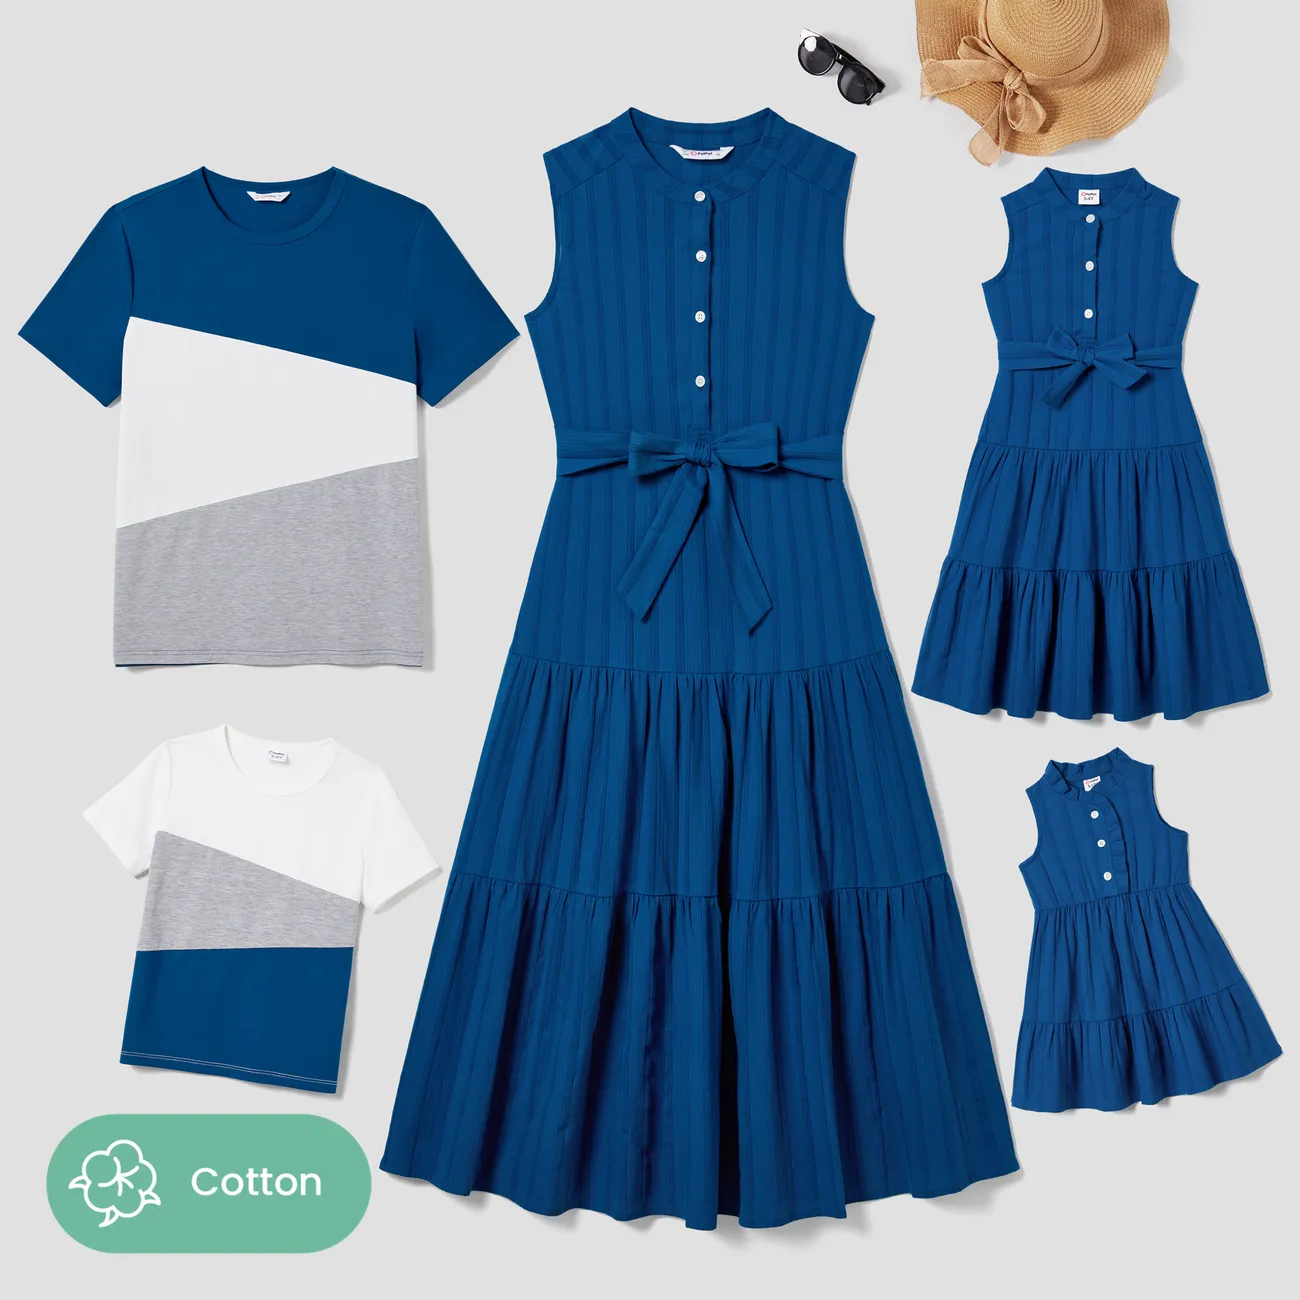 Family Matching Tiered A-line Midi Dress and Colorblock Top Sets Peacockblue big image 1